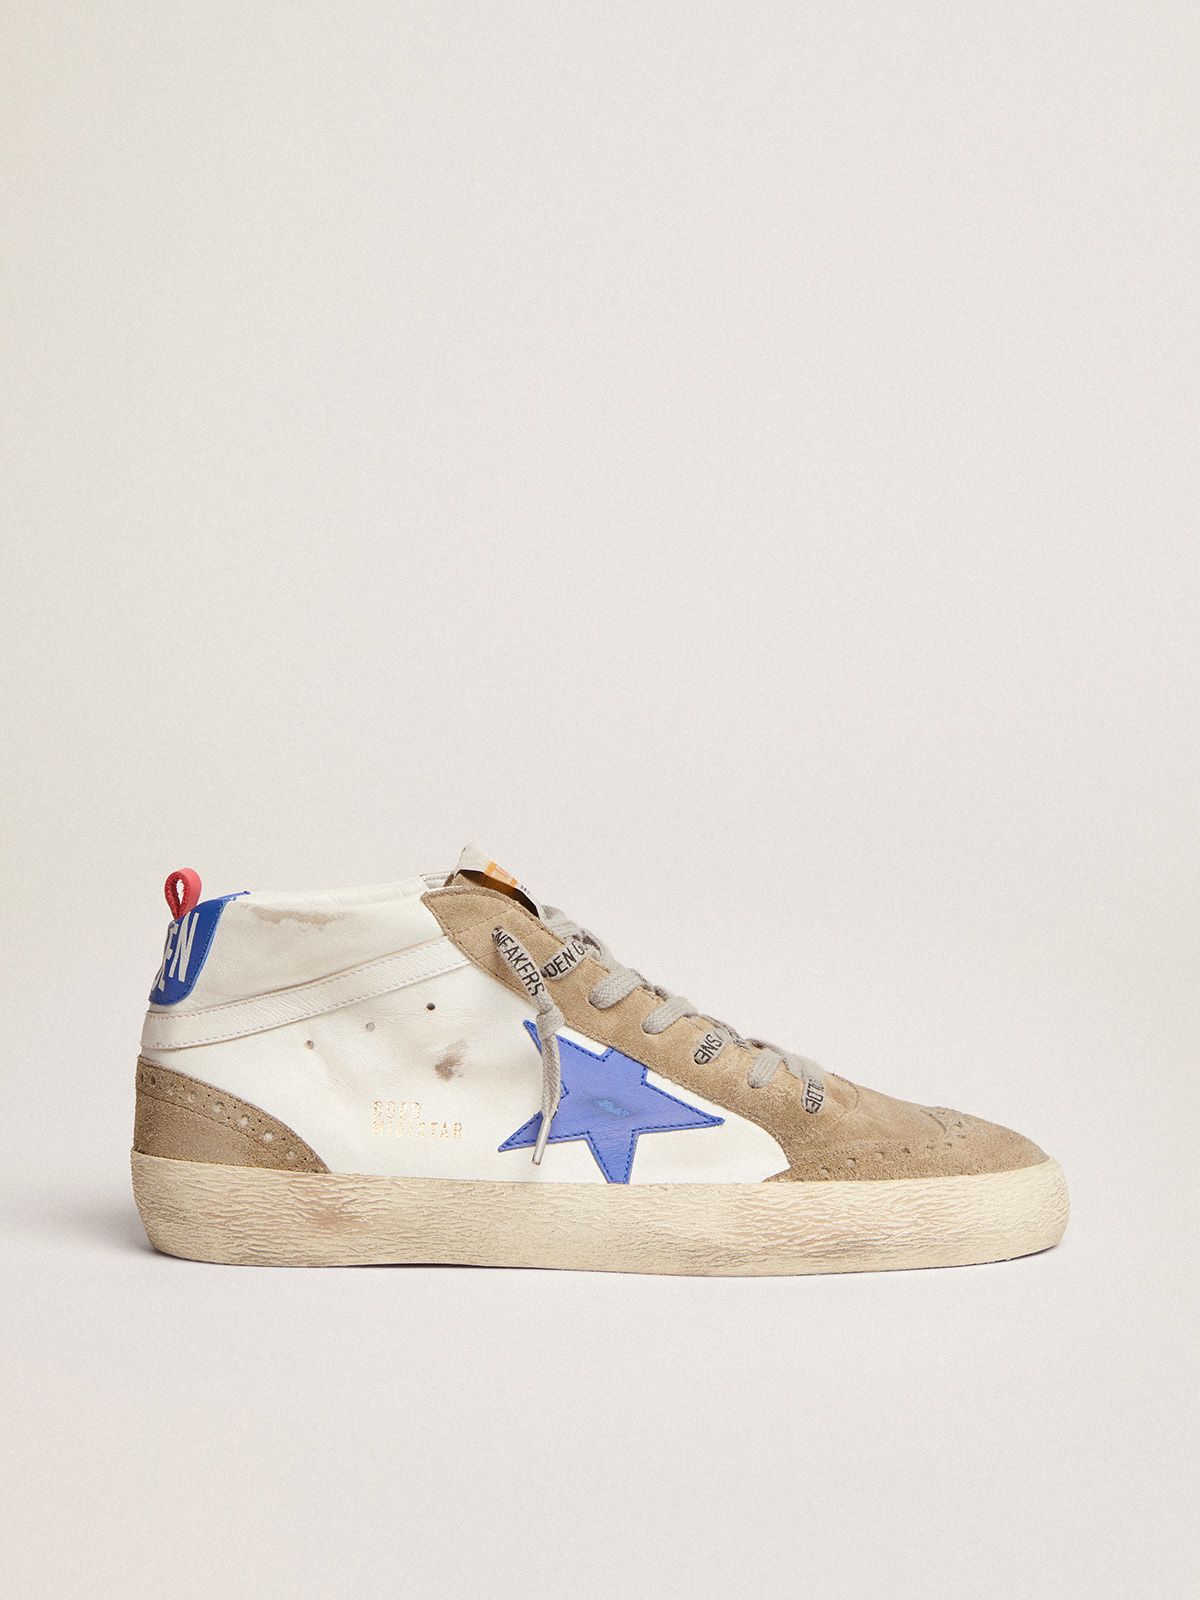 Mid Star sneakers in white leather with blue leather star and dove-gray suede inserts